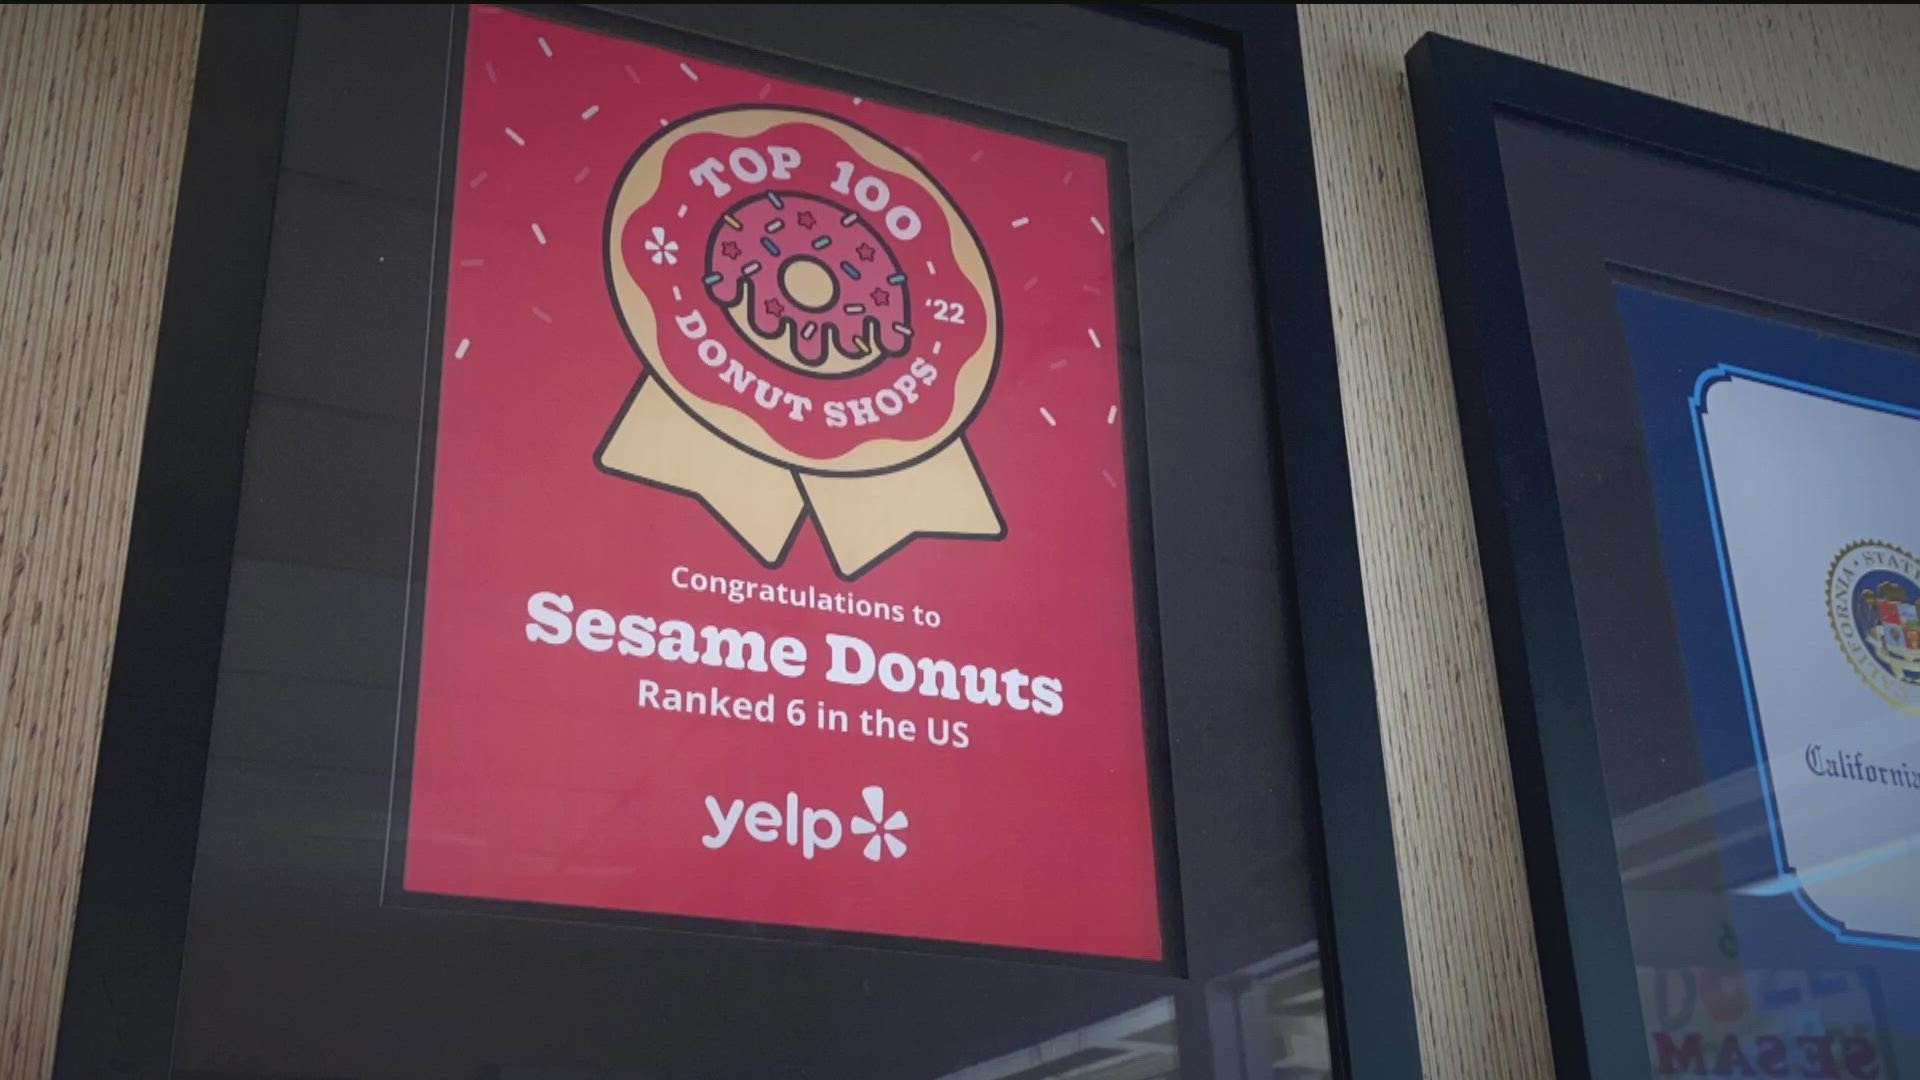 Sesame Donuts ranks 6th in the United States and attracts even more customers after Krispy Kreme moved in.